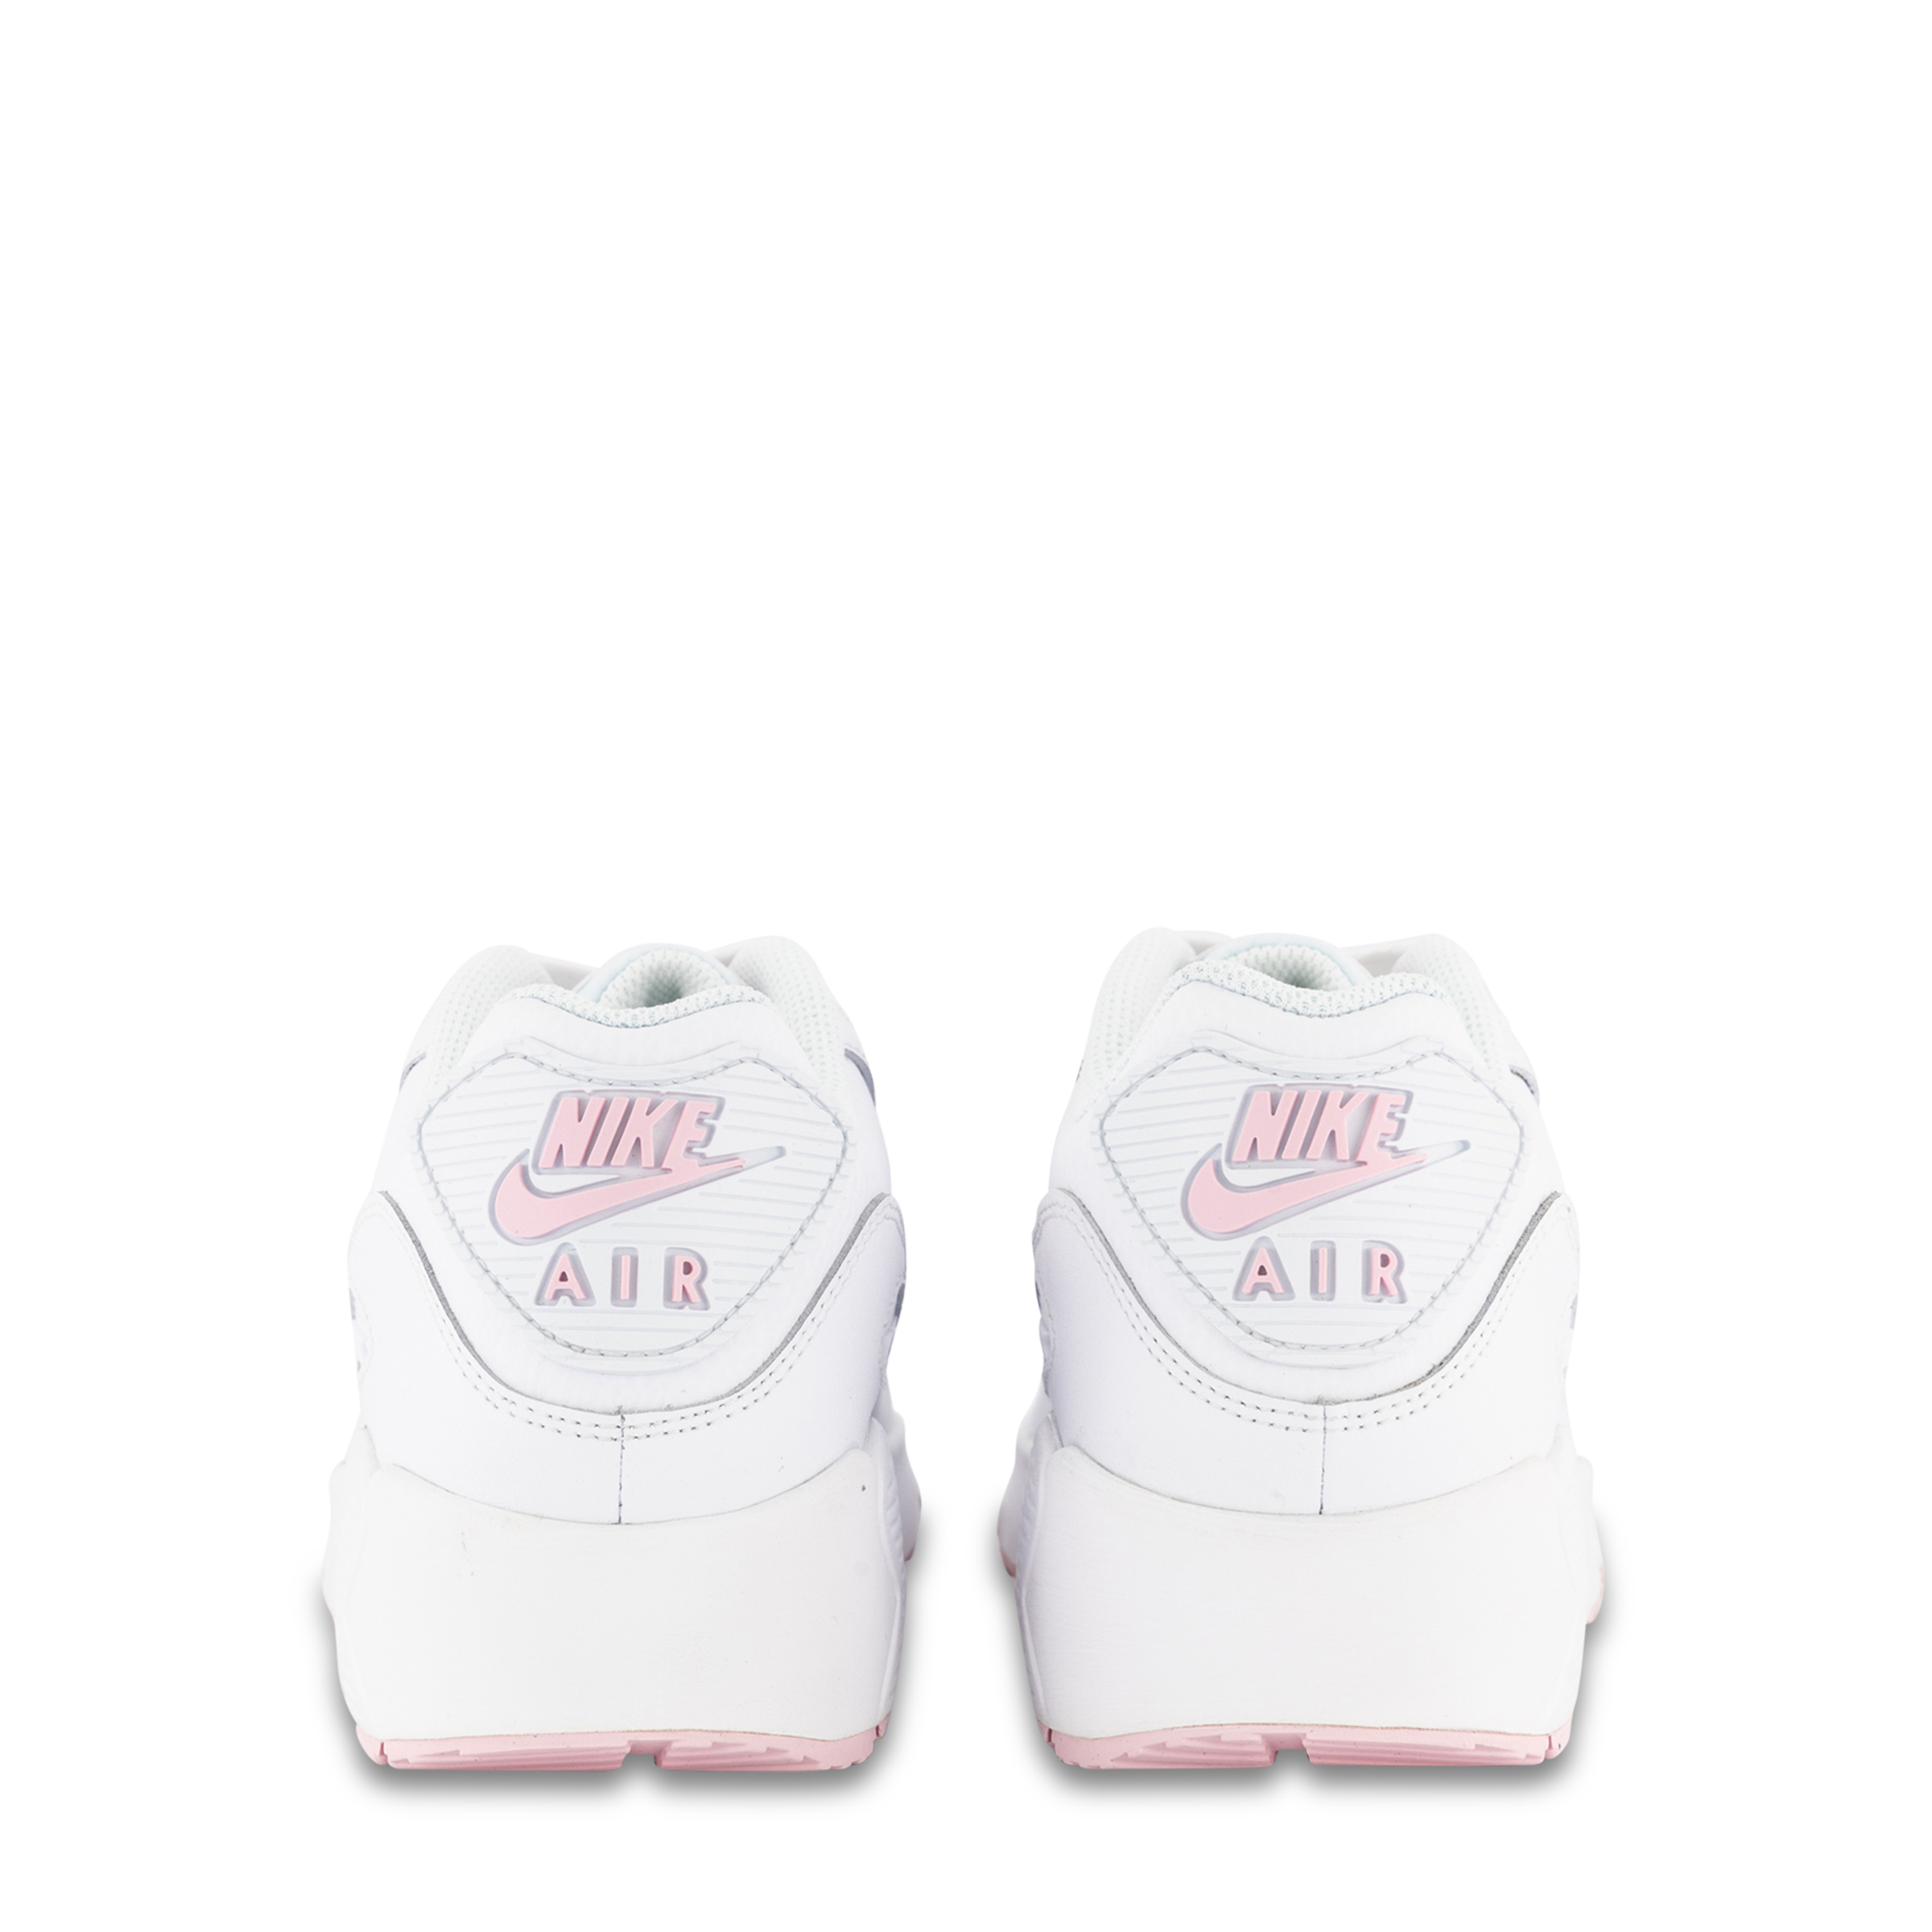 Nike Air Max 90 Youth White/Pink Foam | Hype DC